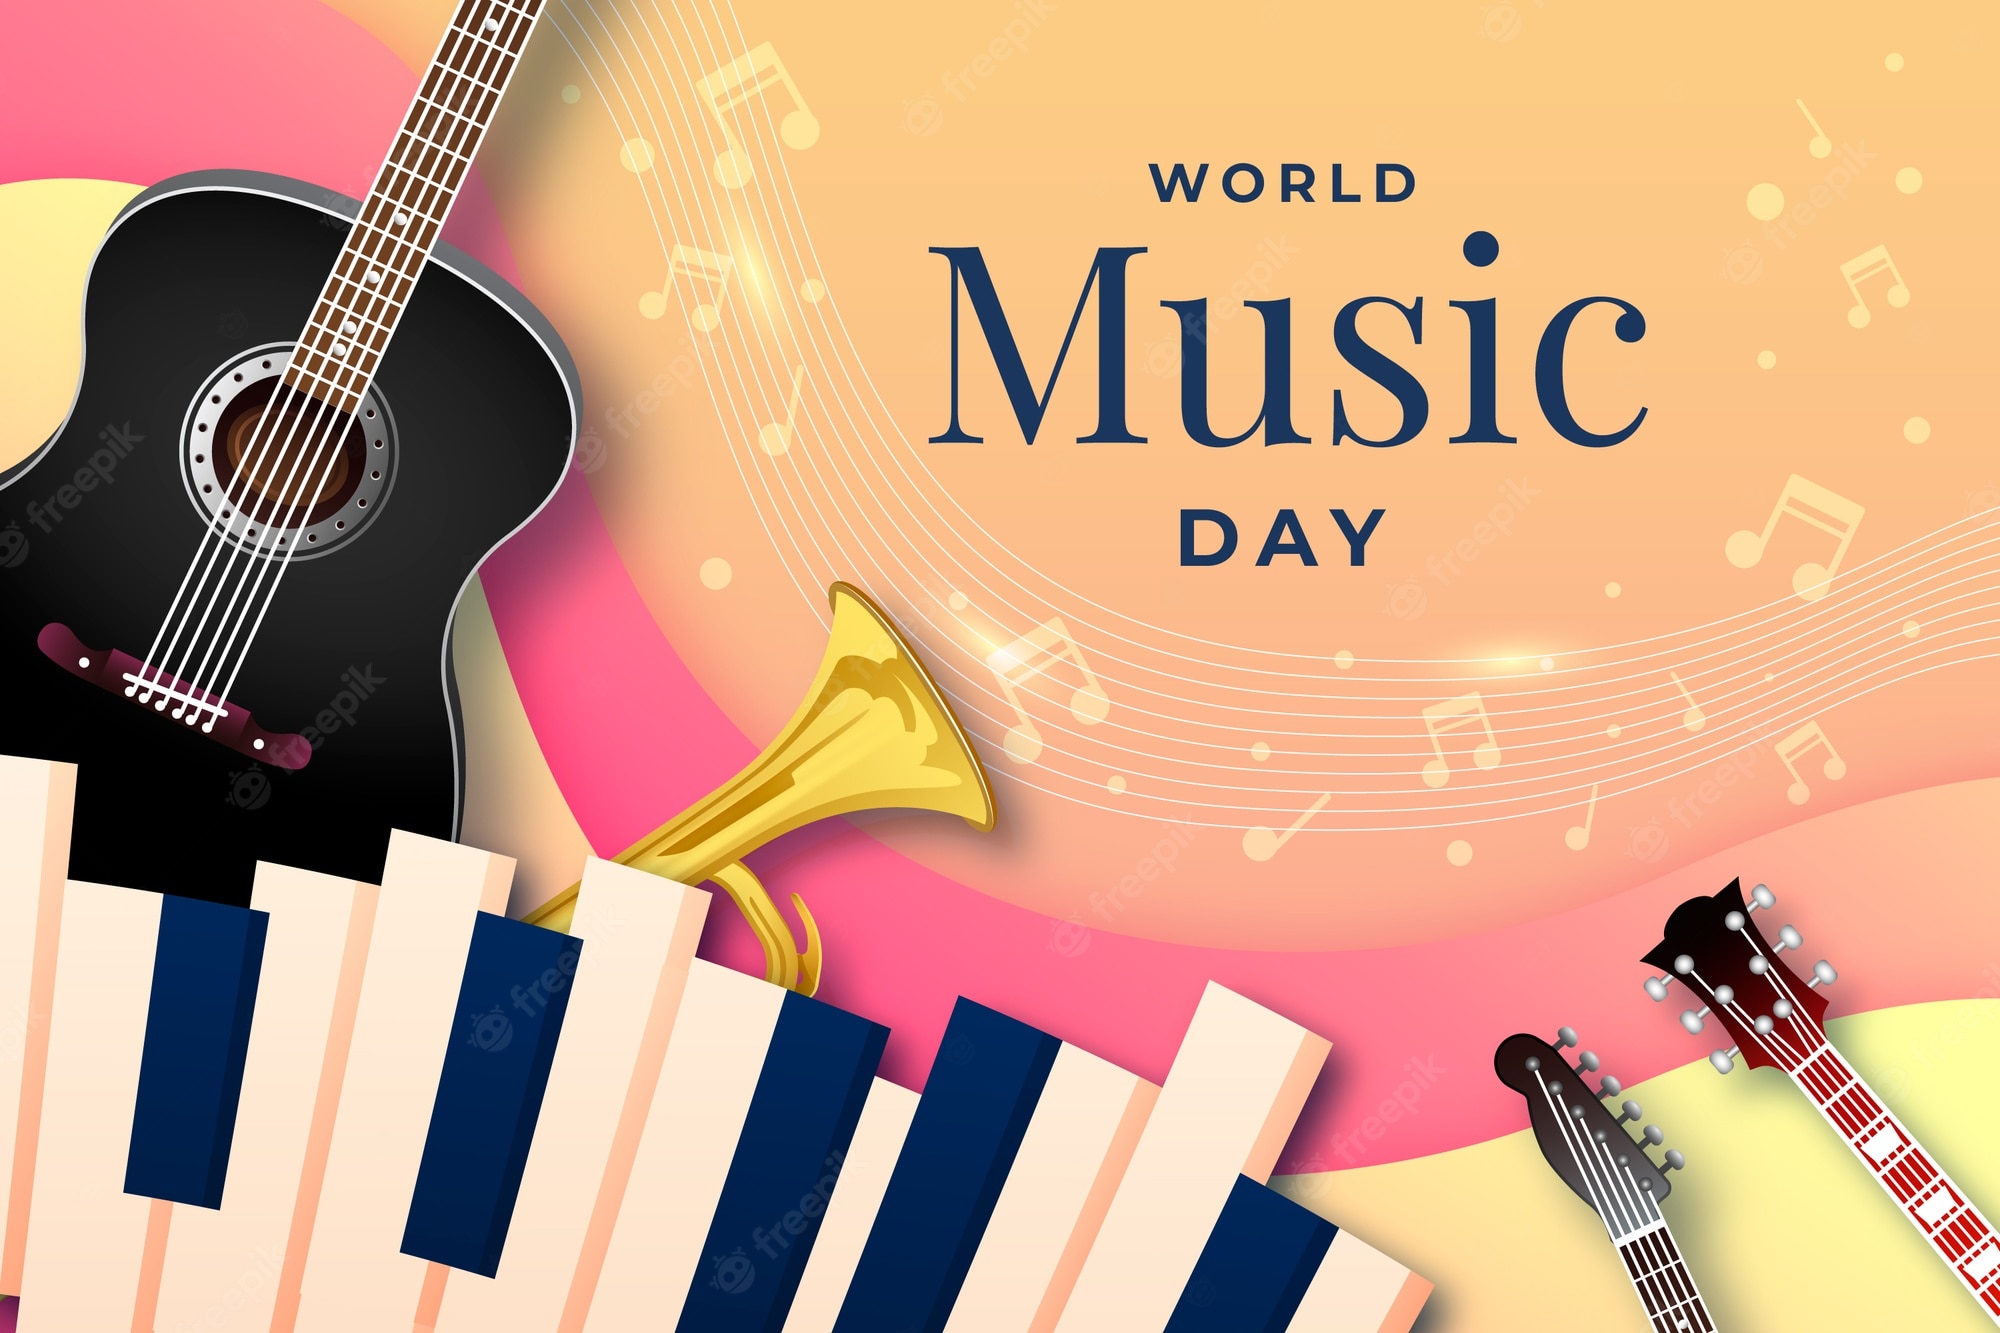 World music day images free vectors stock photos psd